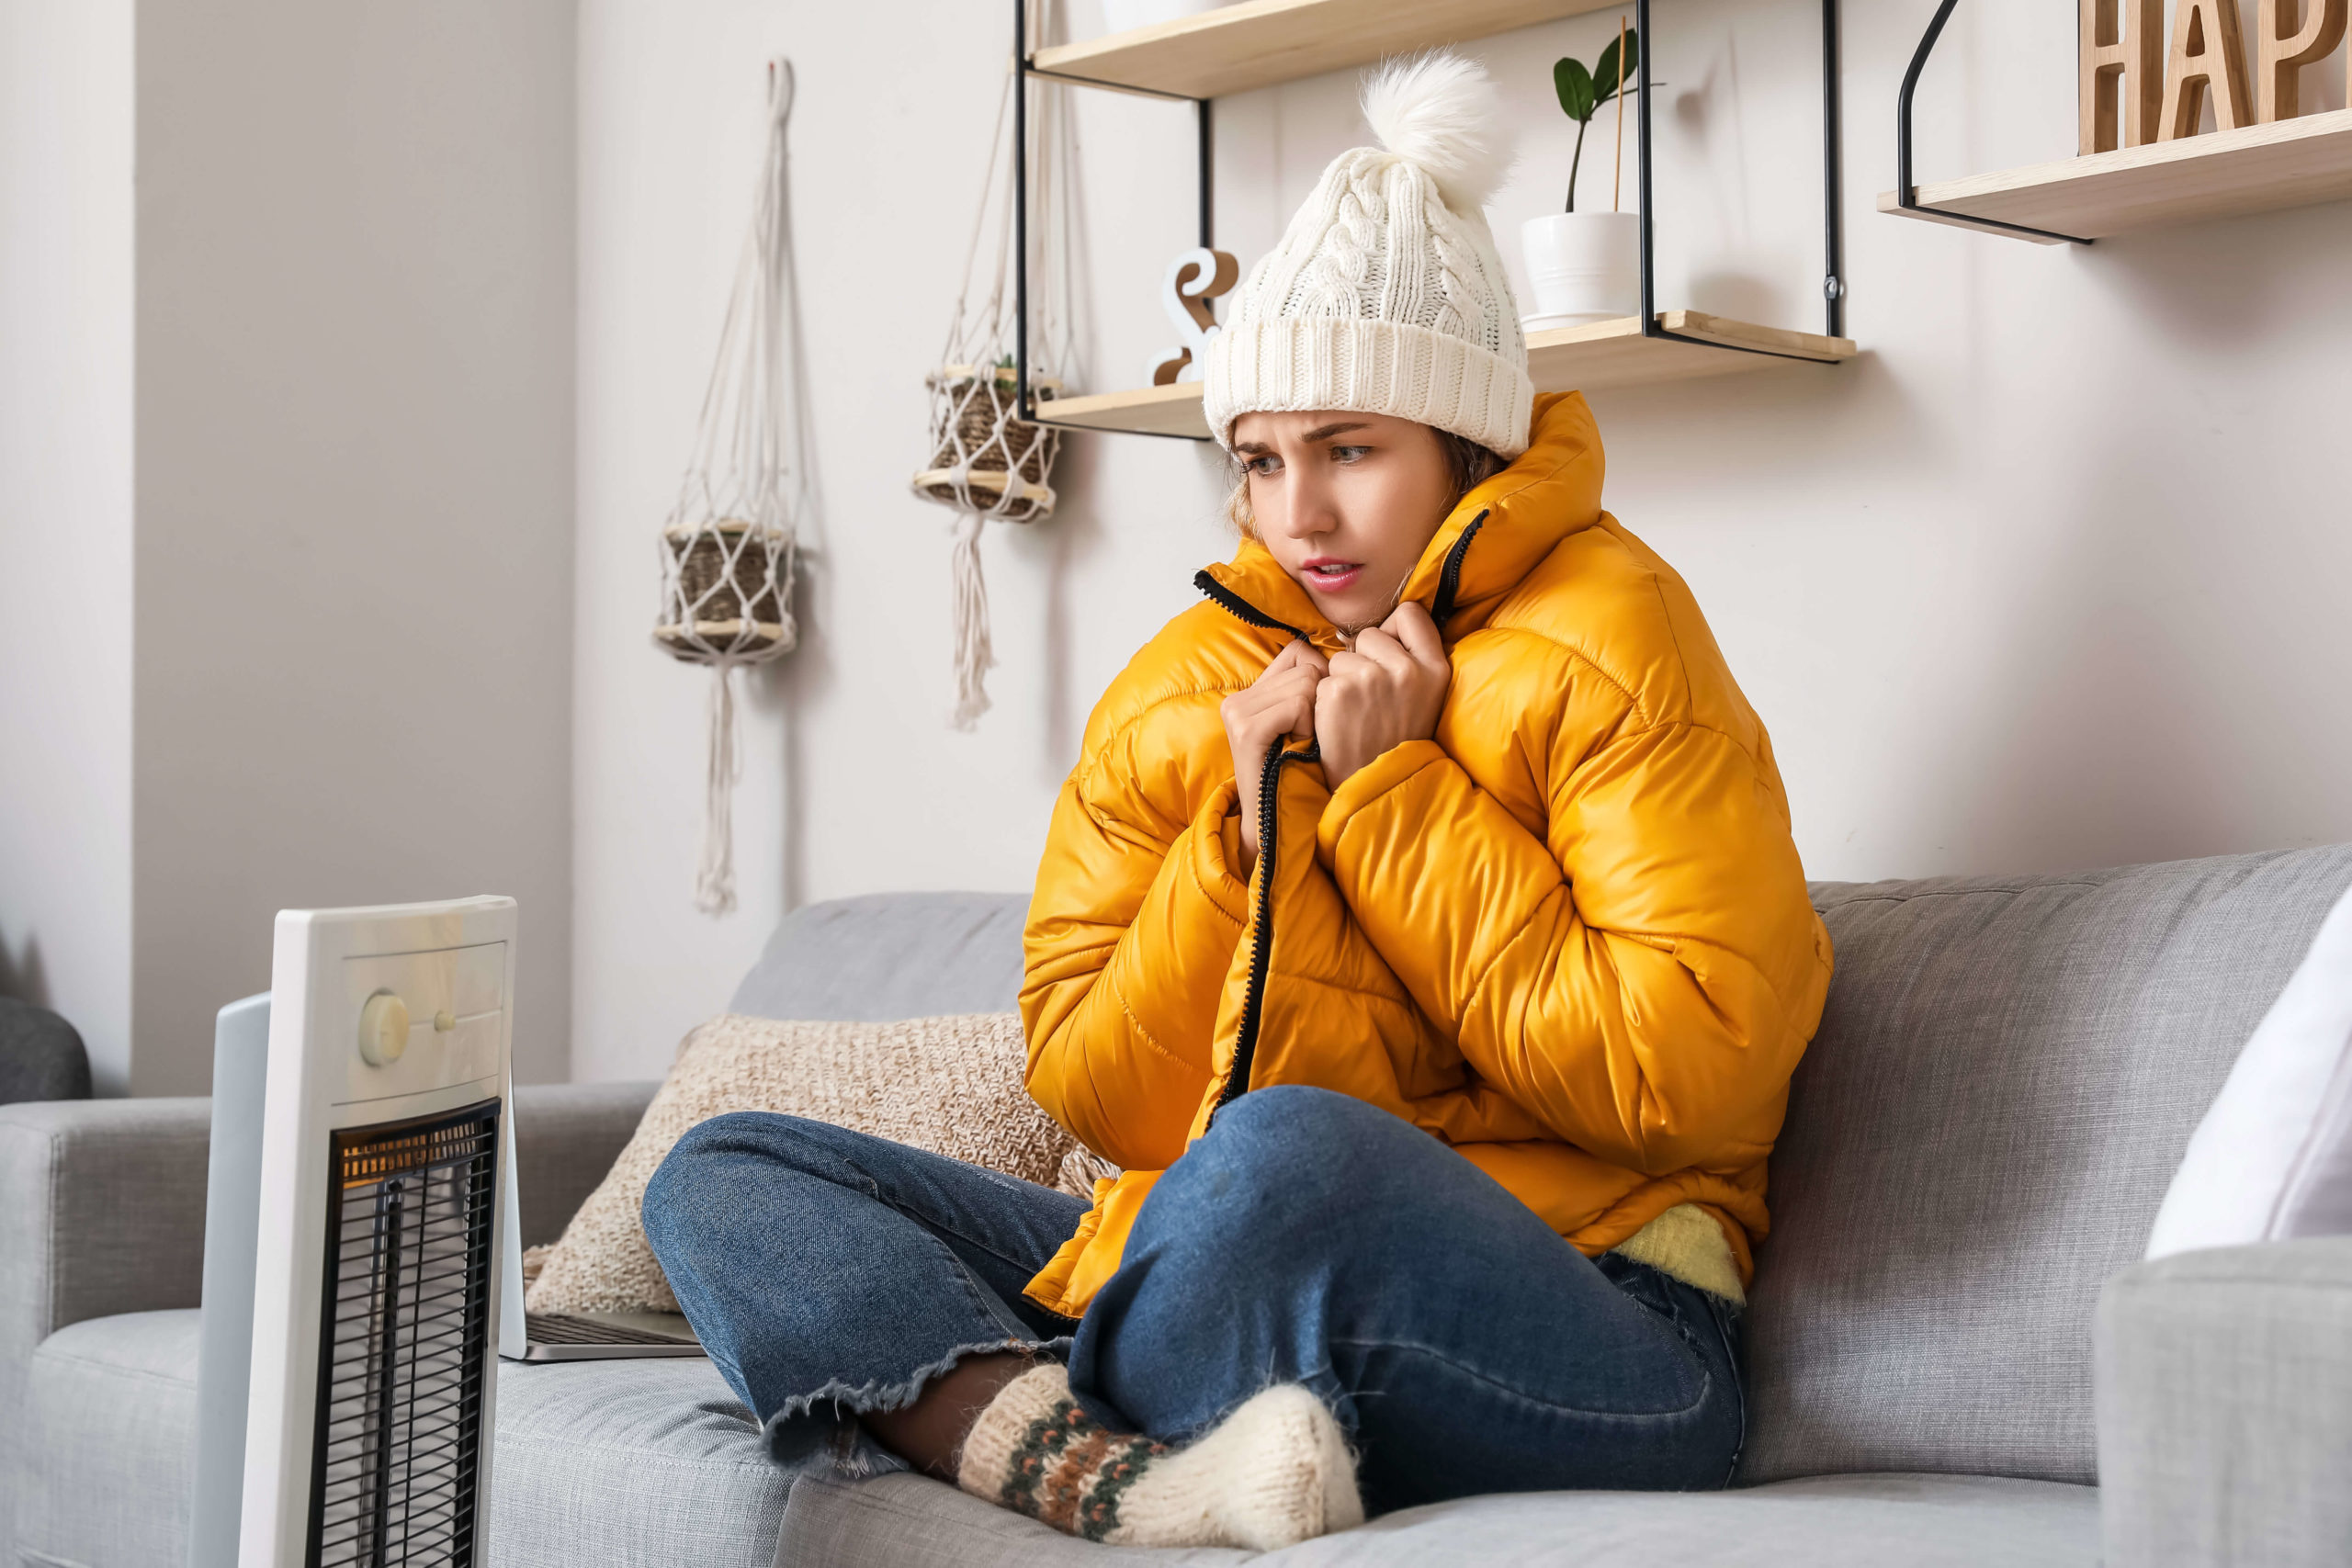 A person wearing a winter hat and coat inside the house, sitting in front of a space heater.